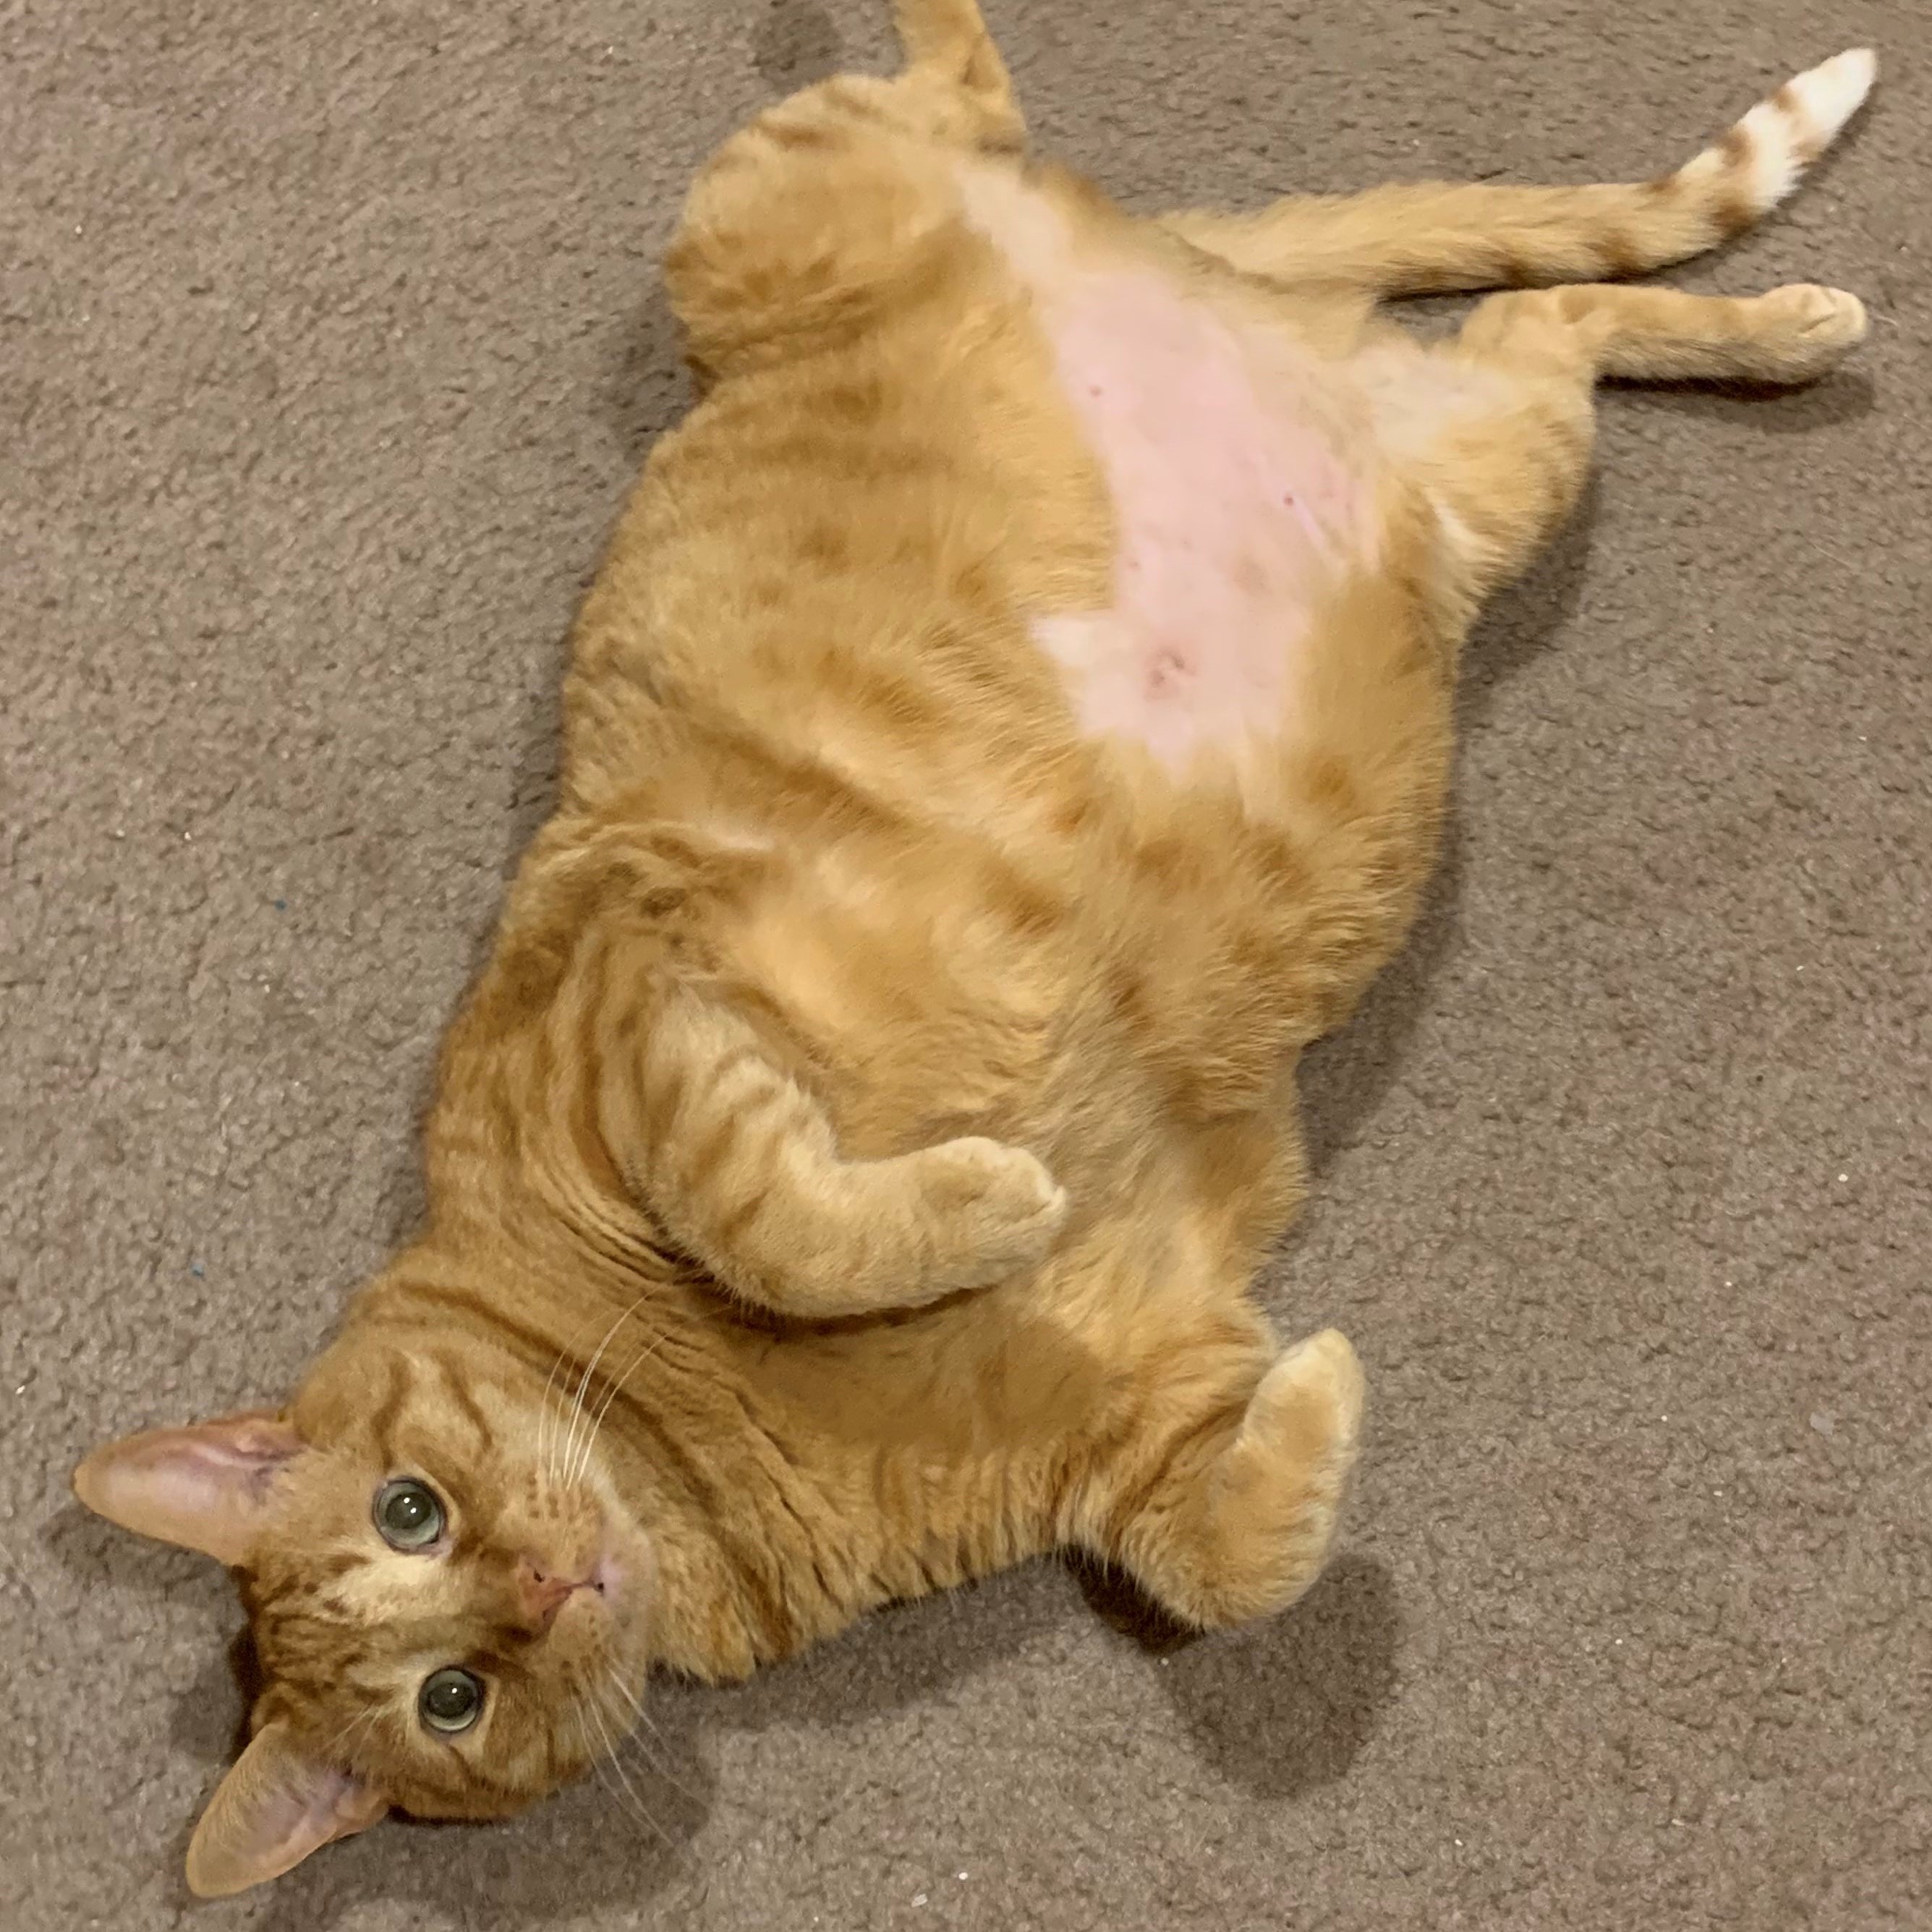 a picture of stanley from above. he is laying on his back with his back legs and tail splayed out and his front paws tucked into his chest. he is looking up at the camera, upside-down